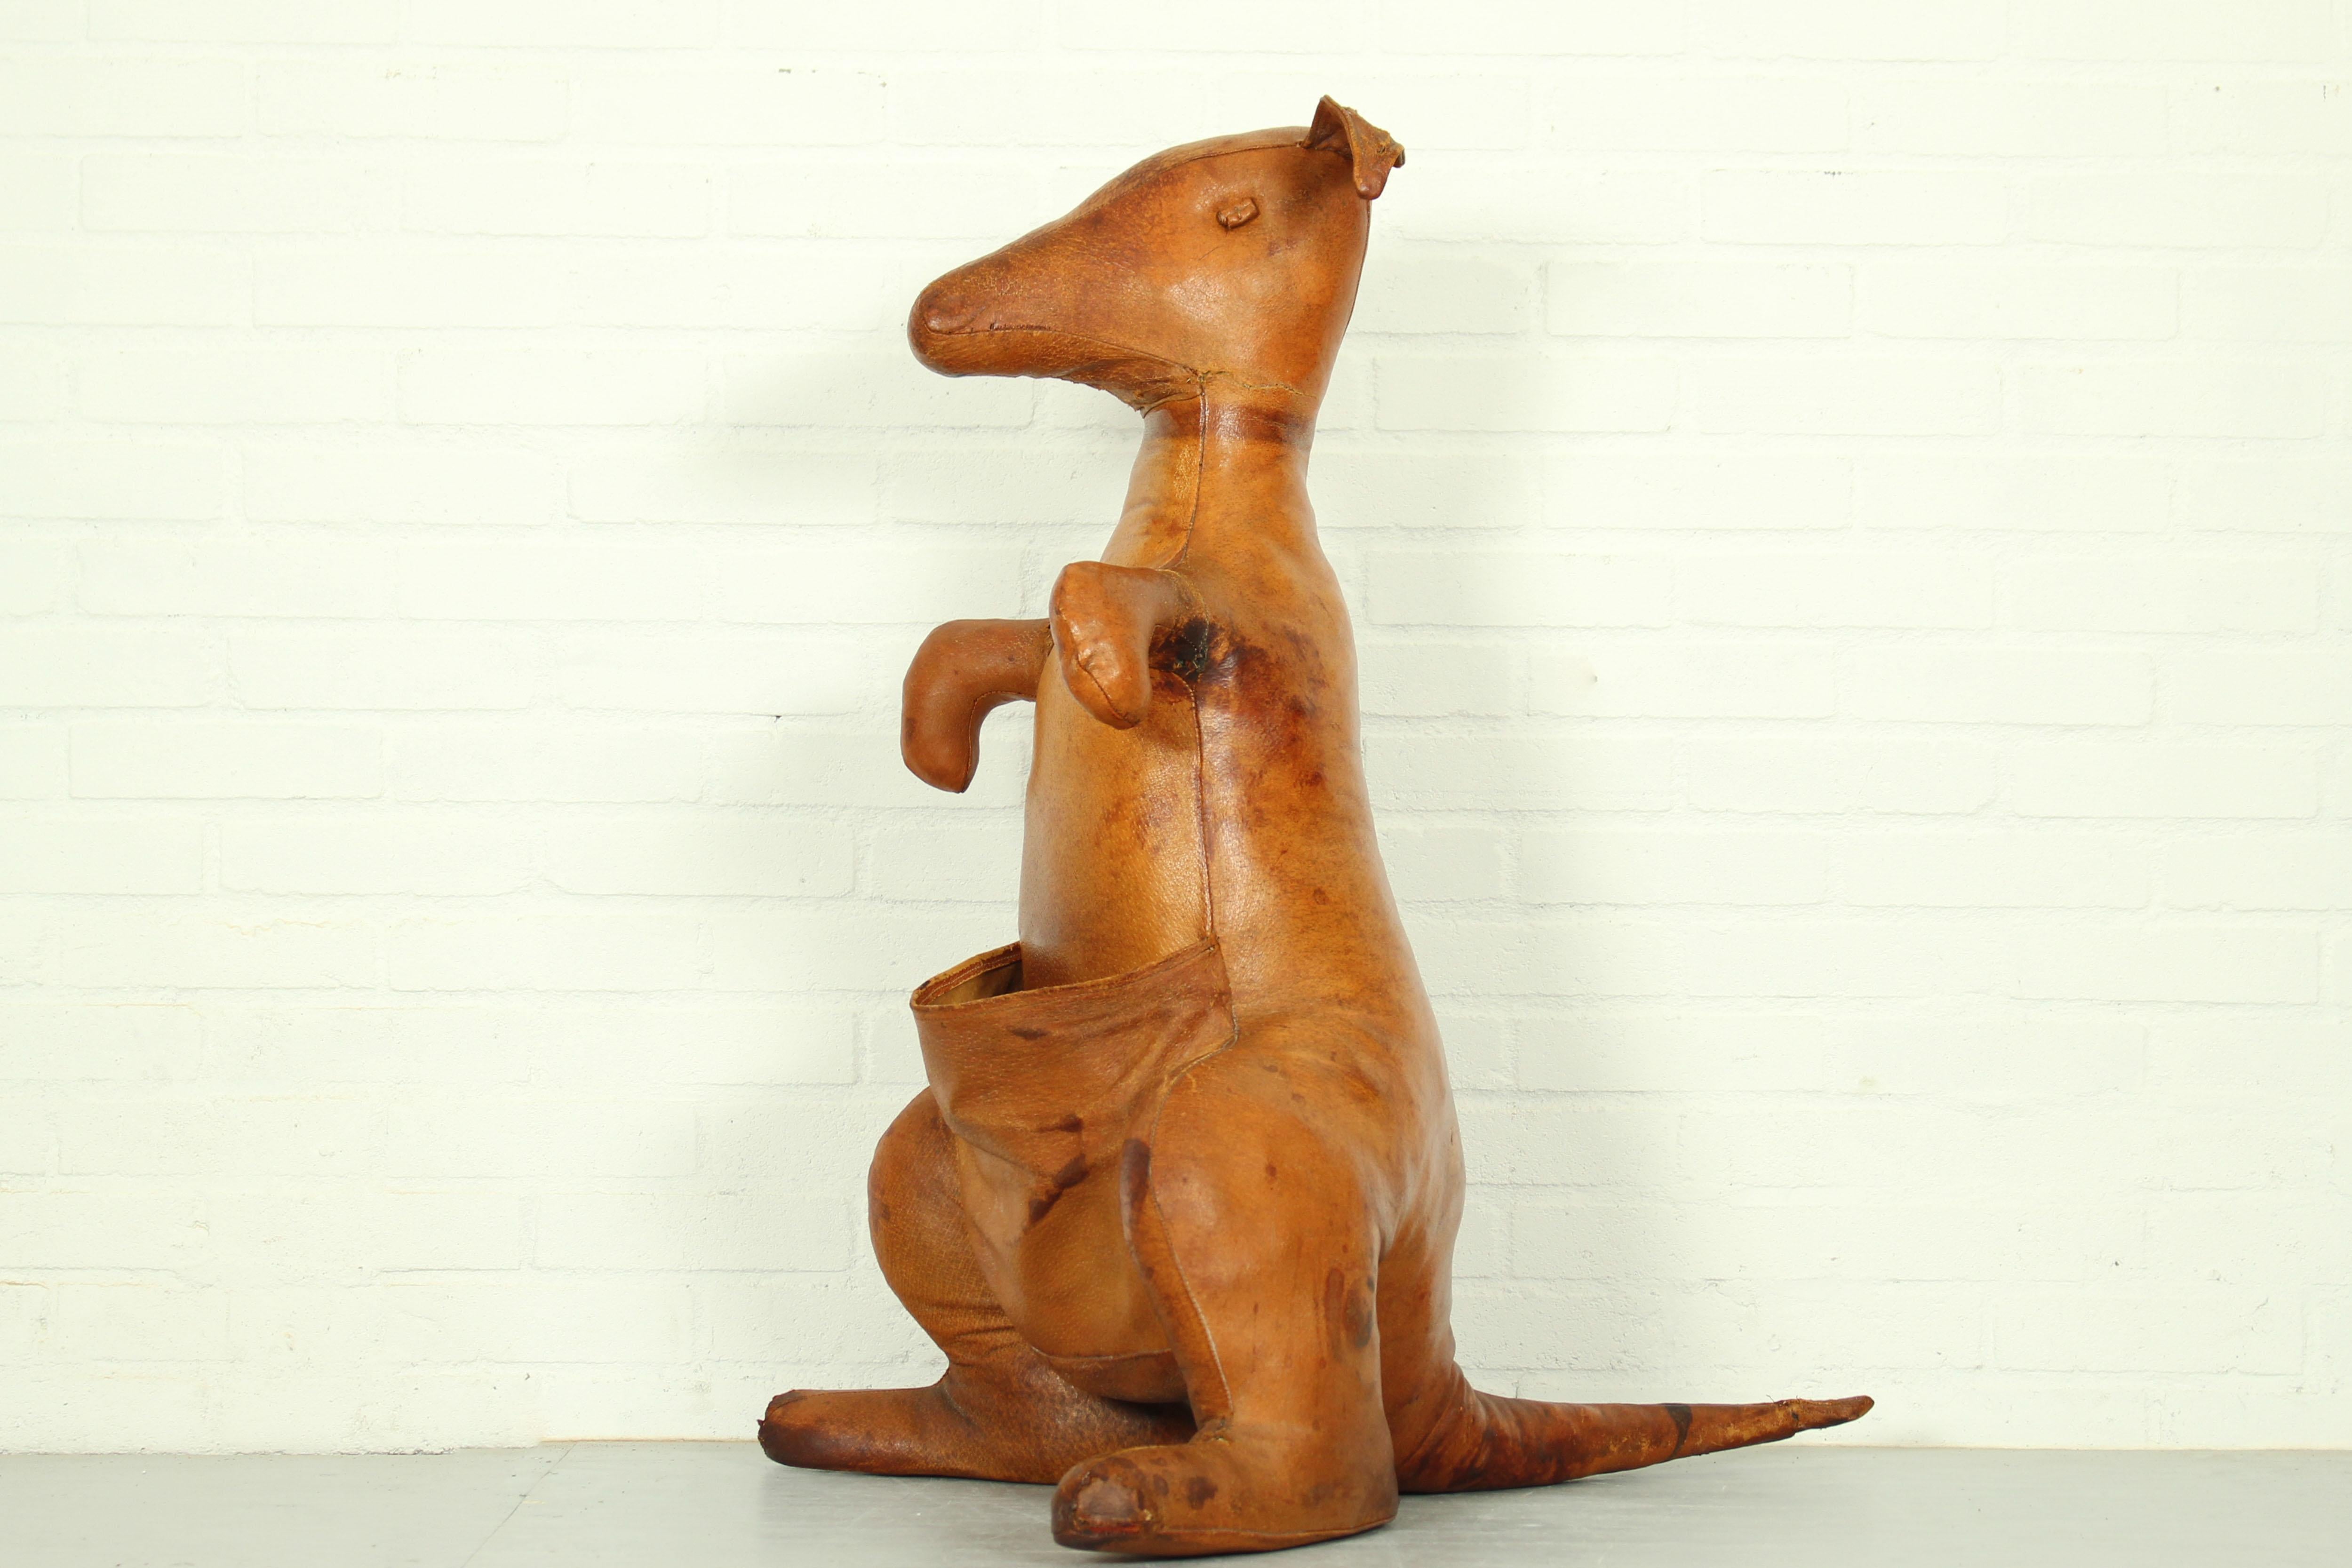 Decorative leather magazine holder Kangaroo designed by Dimitri Omersa, England 1960. The Kangaroo is one of the rarer and nicest animals produced by Dimitri Omersa for Liberty’s. This kangaroo was made of top quality full grain cowhide leather,